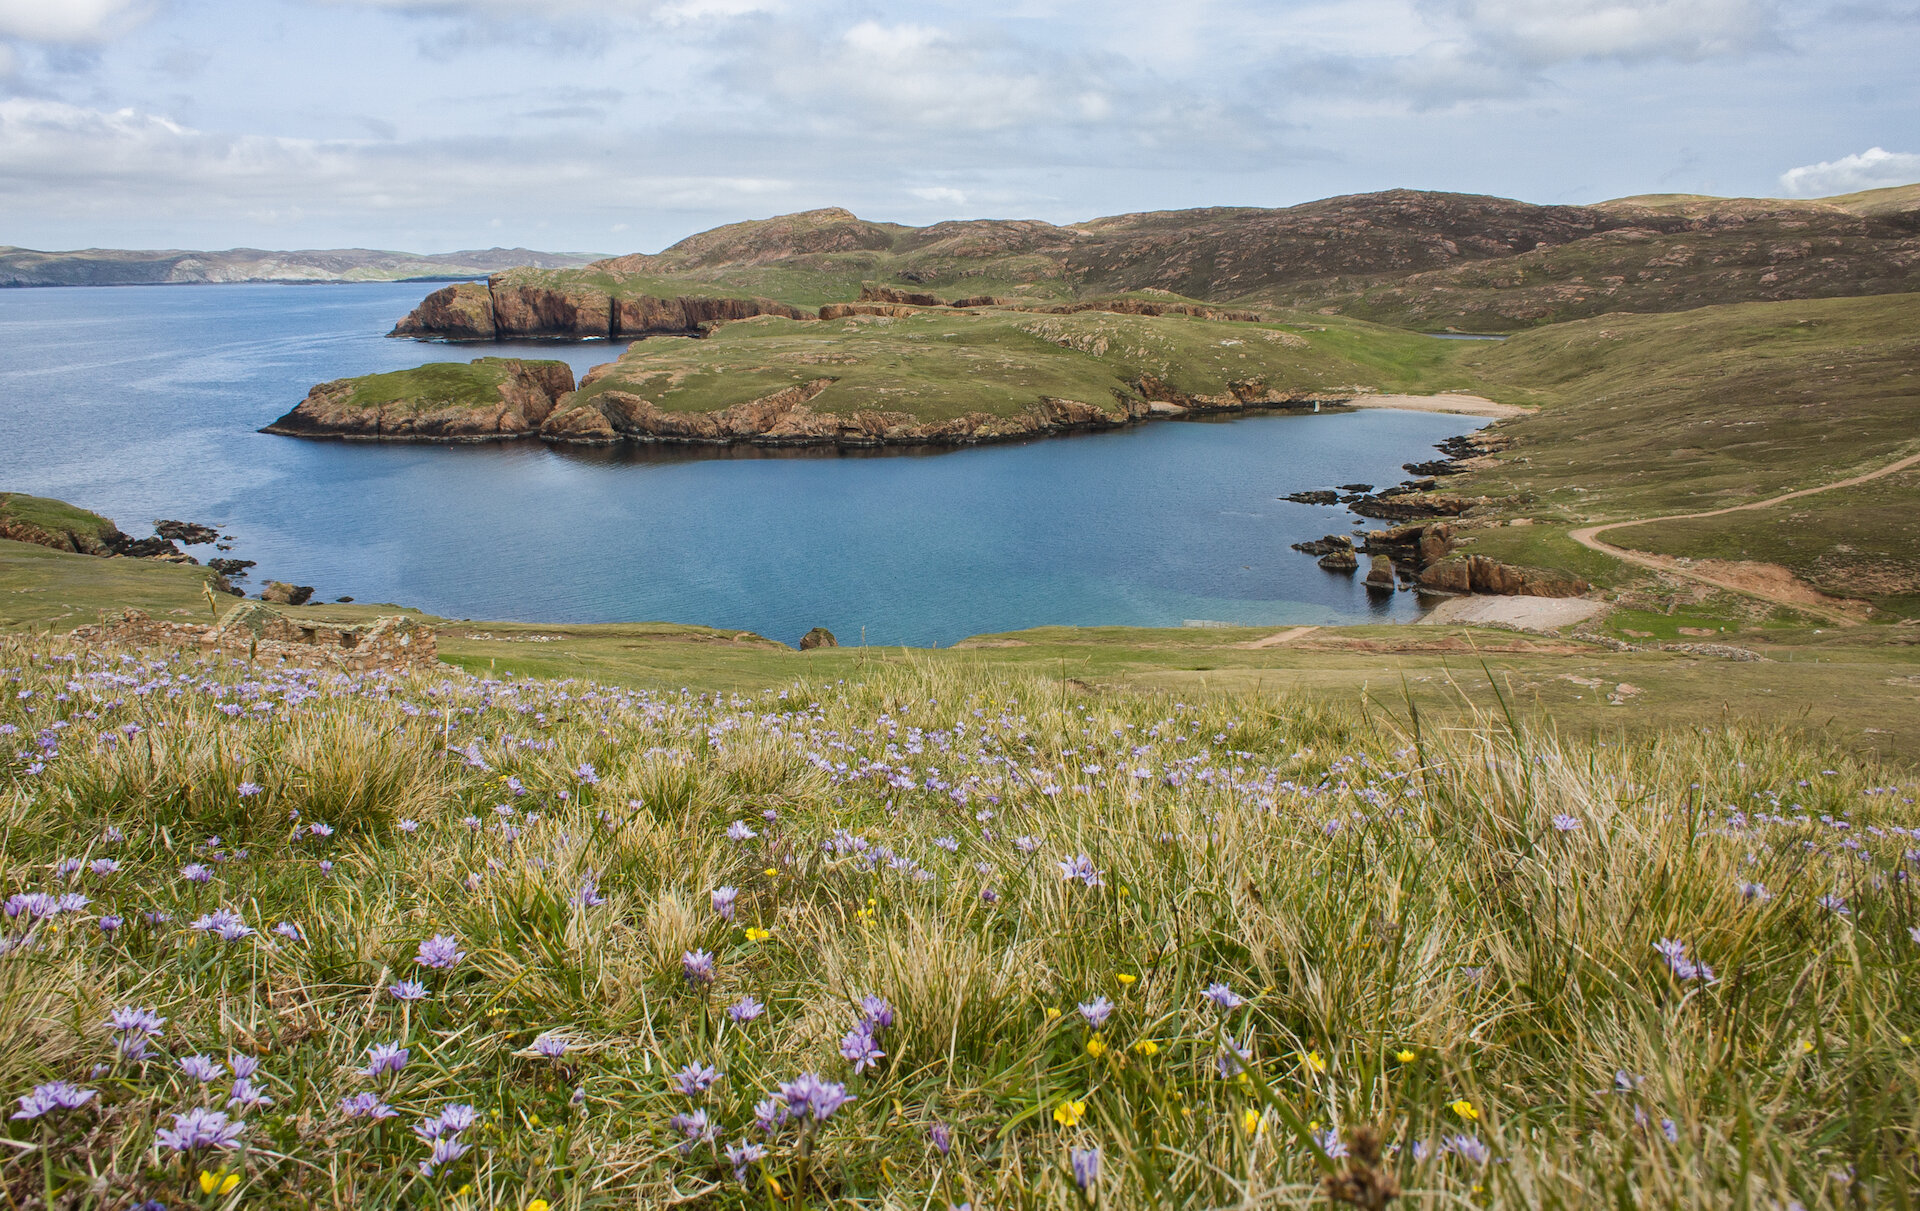 Laura's commute from Lerwick to beautiful South Nesting is a stress-free 20-minute drive.